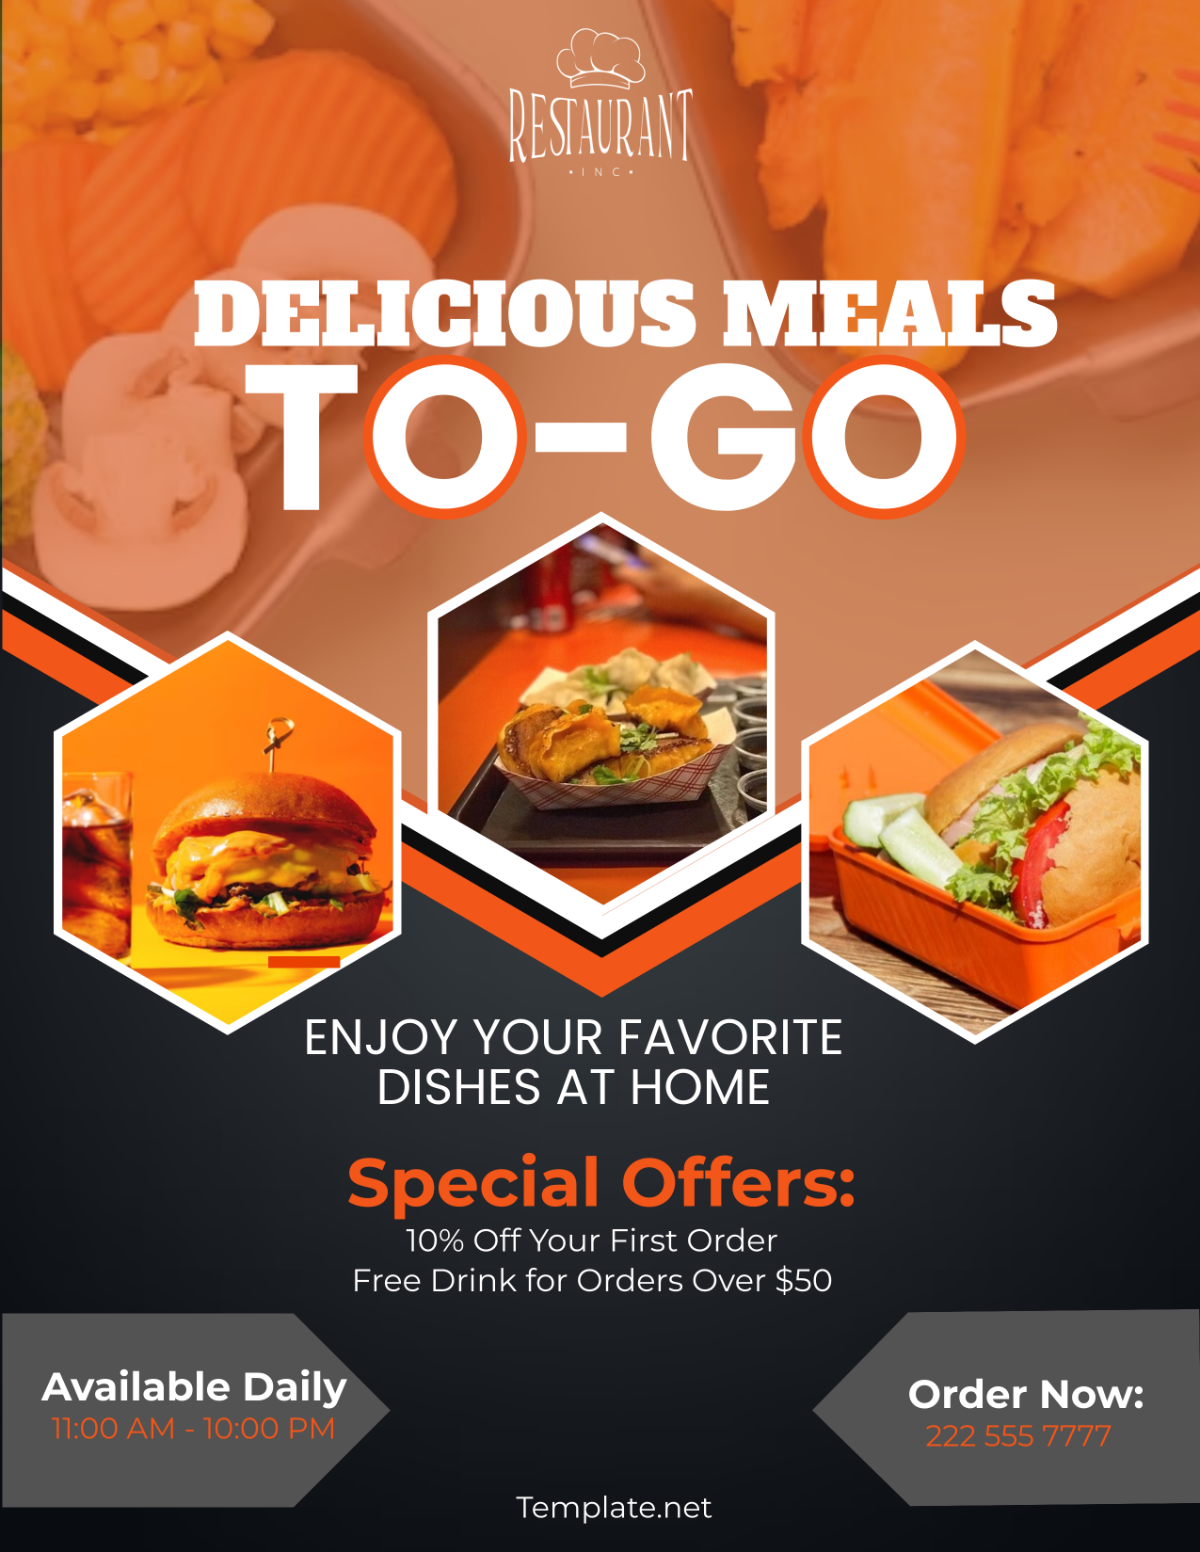 Restaurant Takeout/Delivery Flyer Template